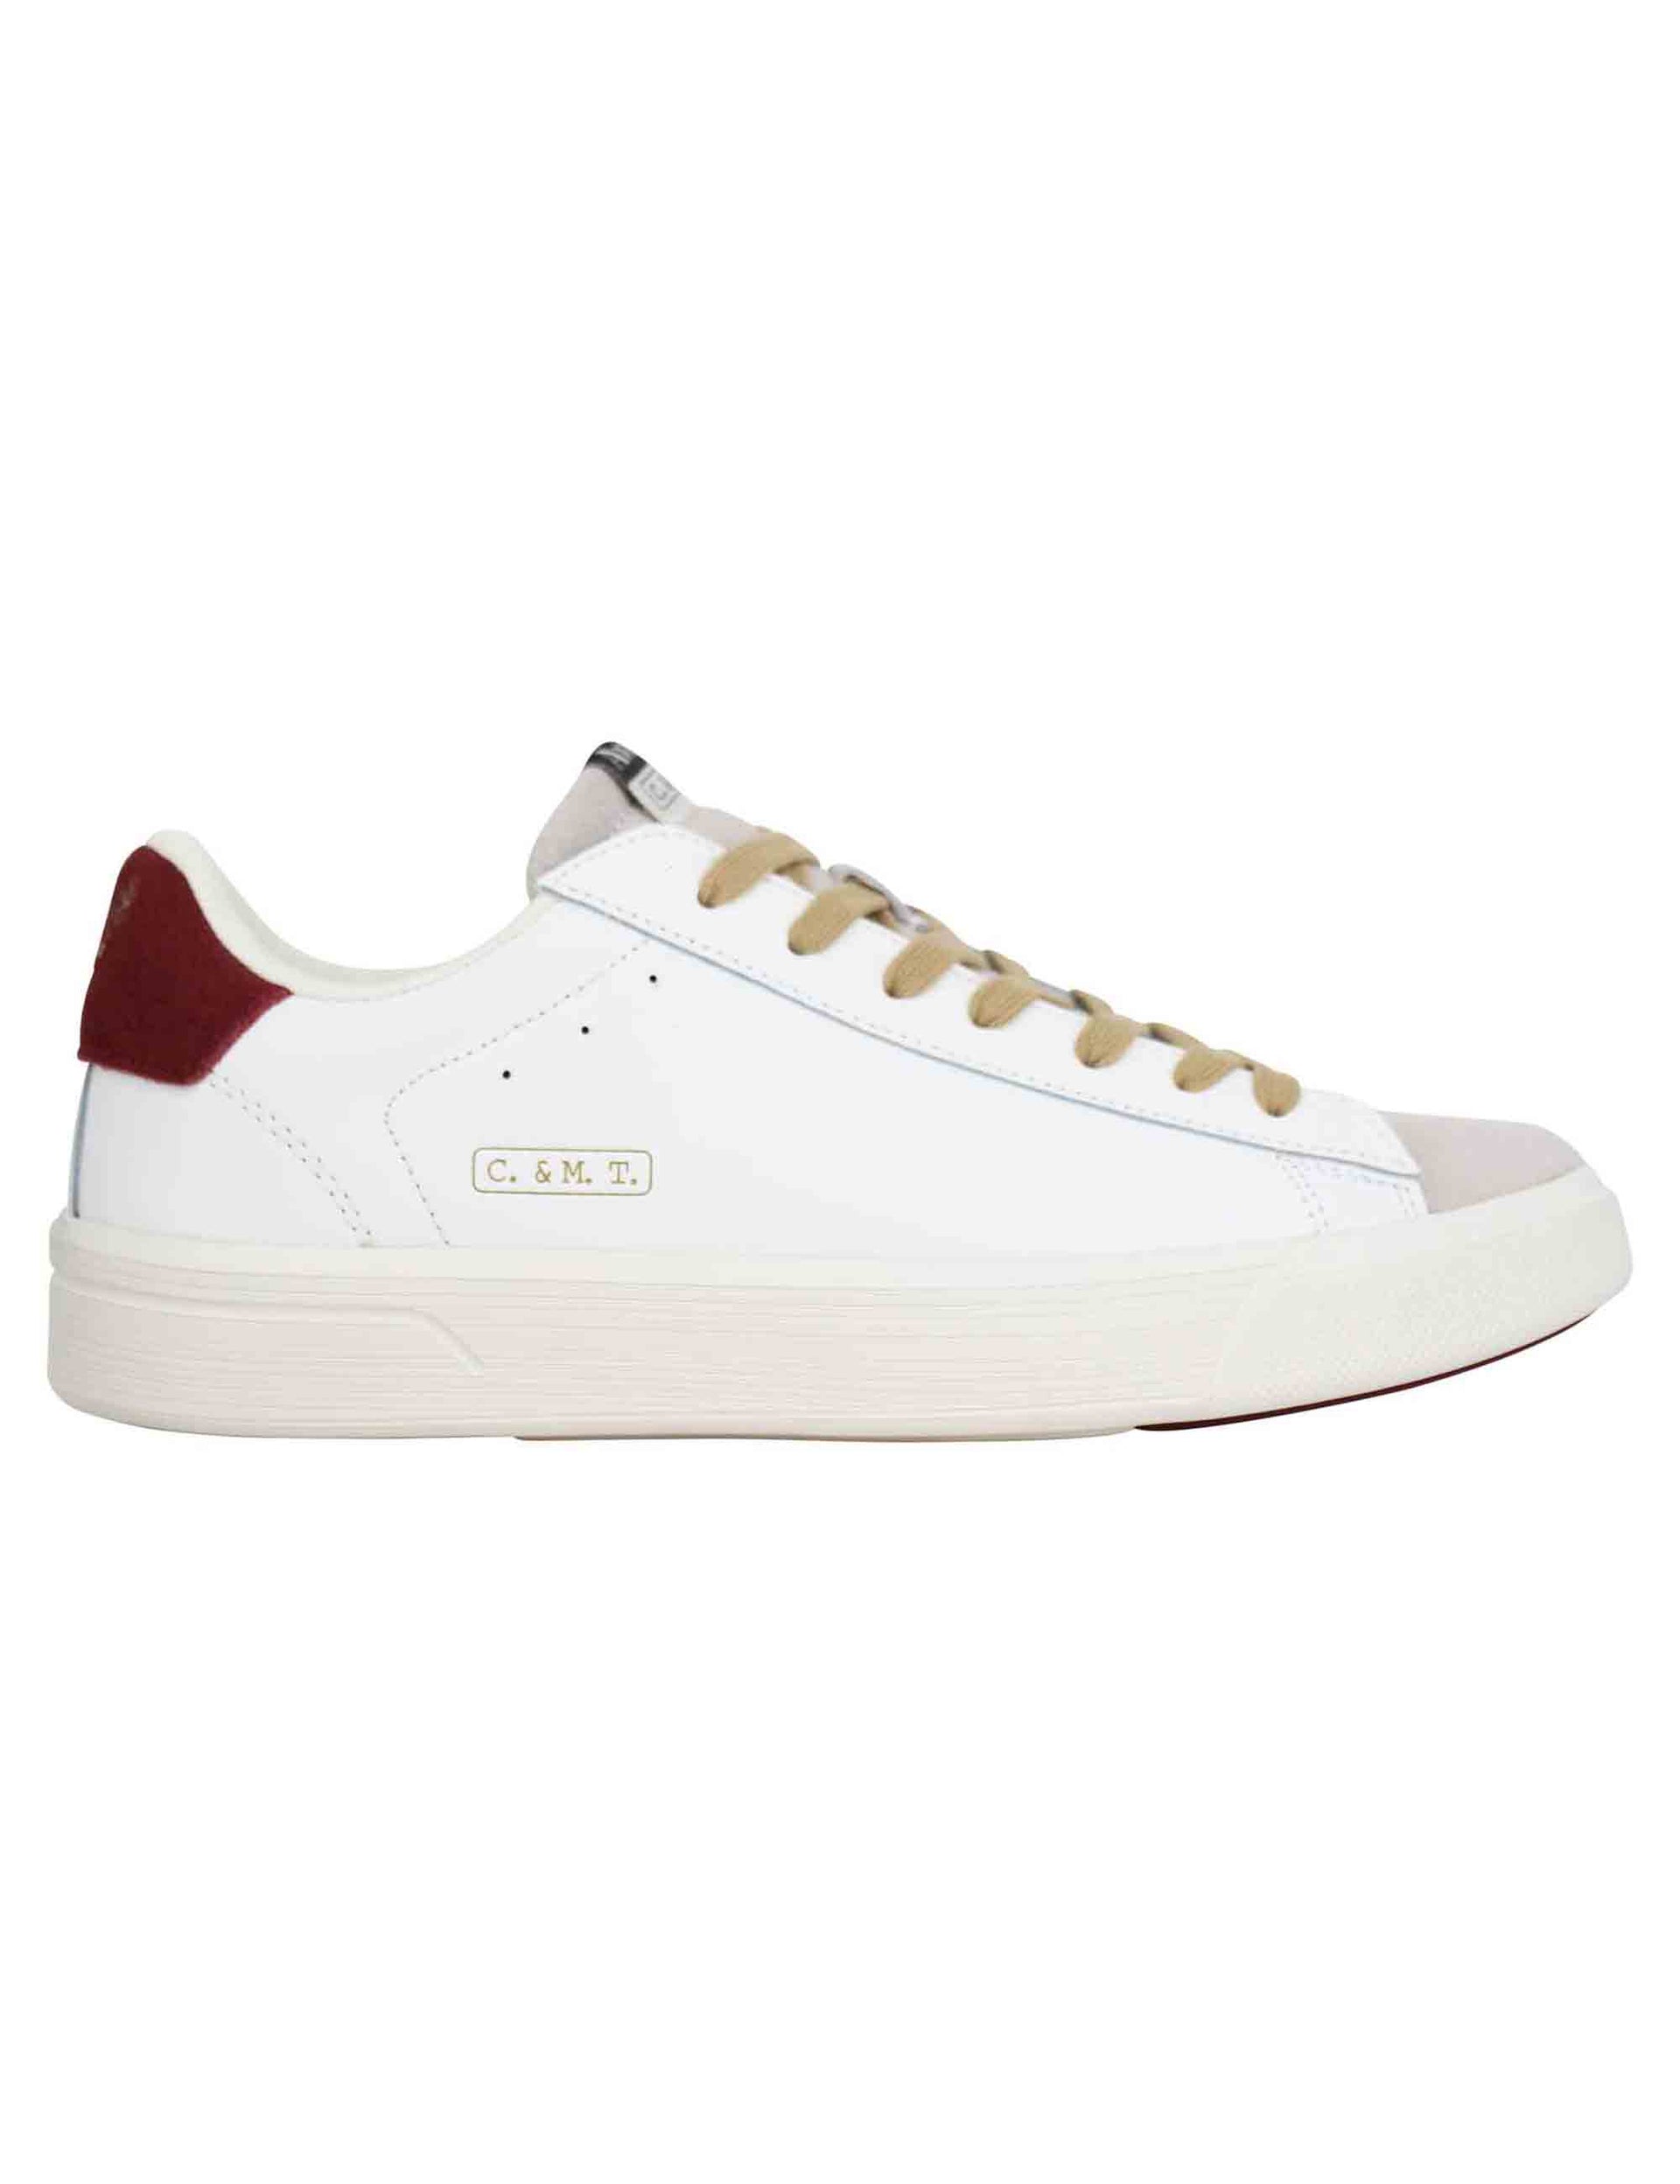 Mikel men's sneakers in white vegan leather with vintage sole